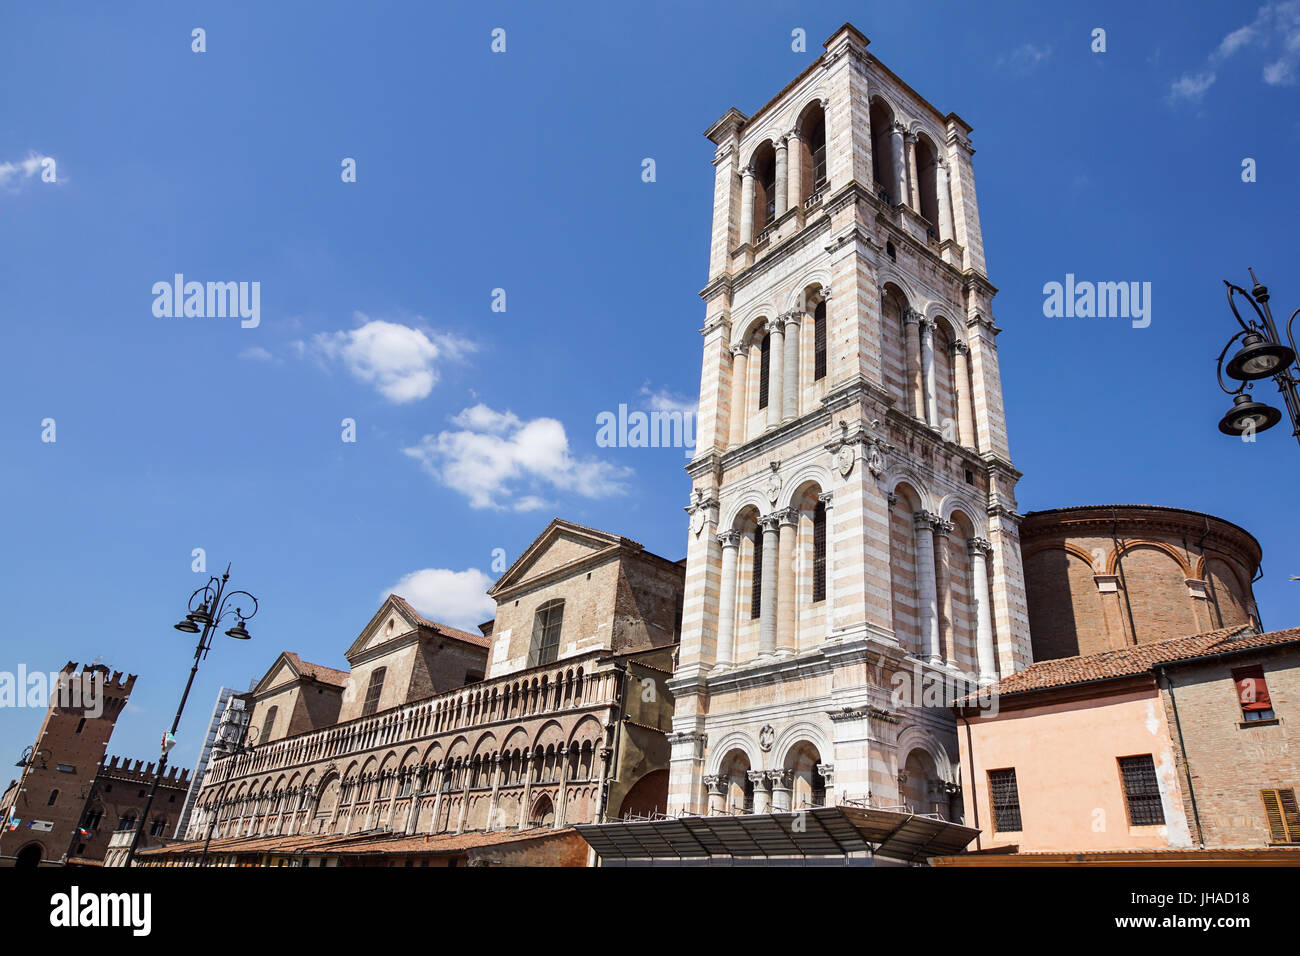 FERRARA, ITALY - JUNE 2017 : view of Castello Estense in Ferrara city. Castello Estense Este castle, Castello di San Michele, St Michael castle moated medieval castle in the center of town Stock Photo